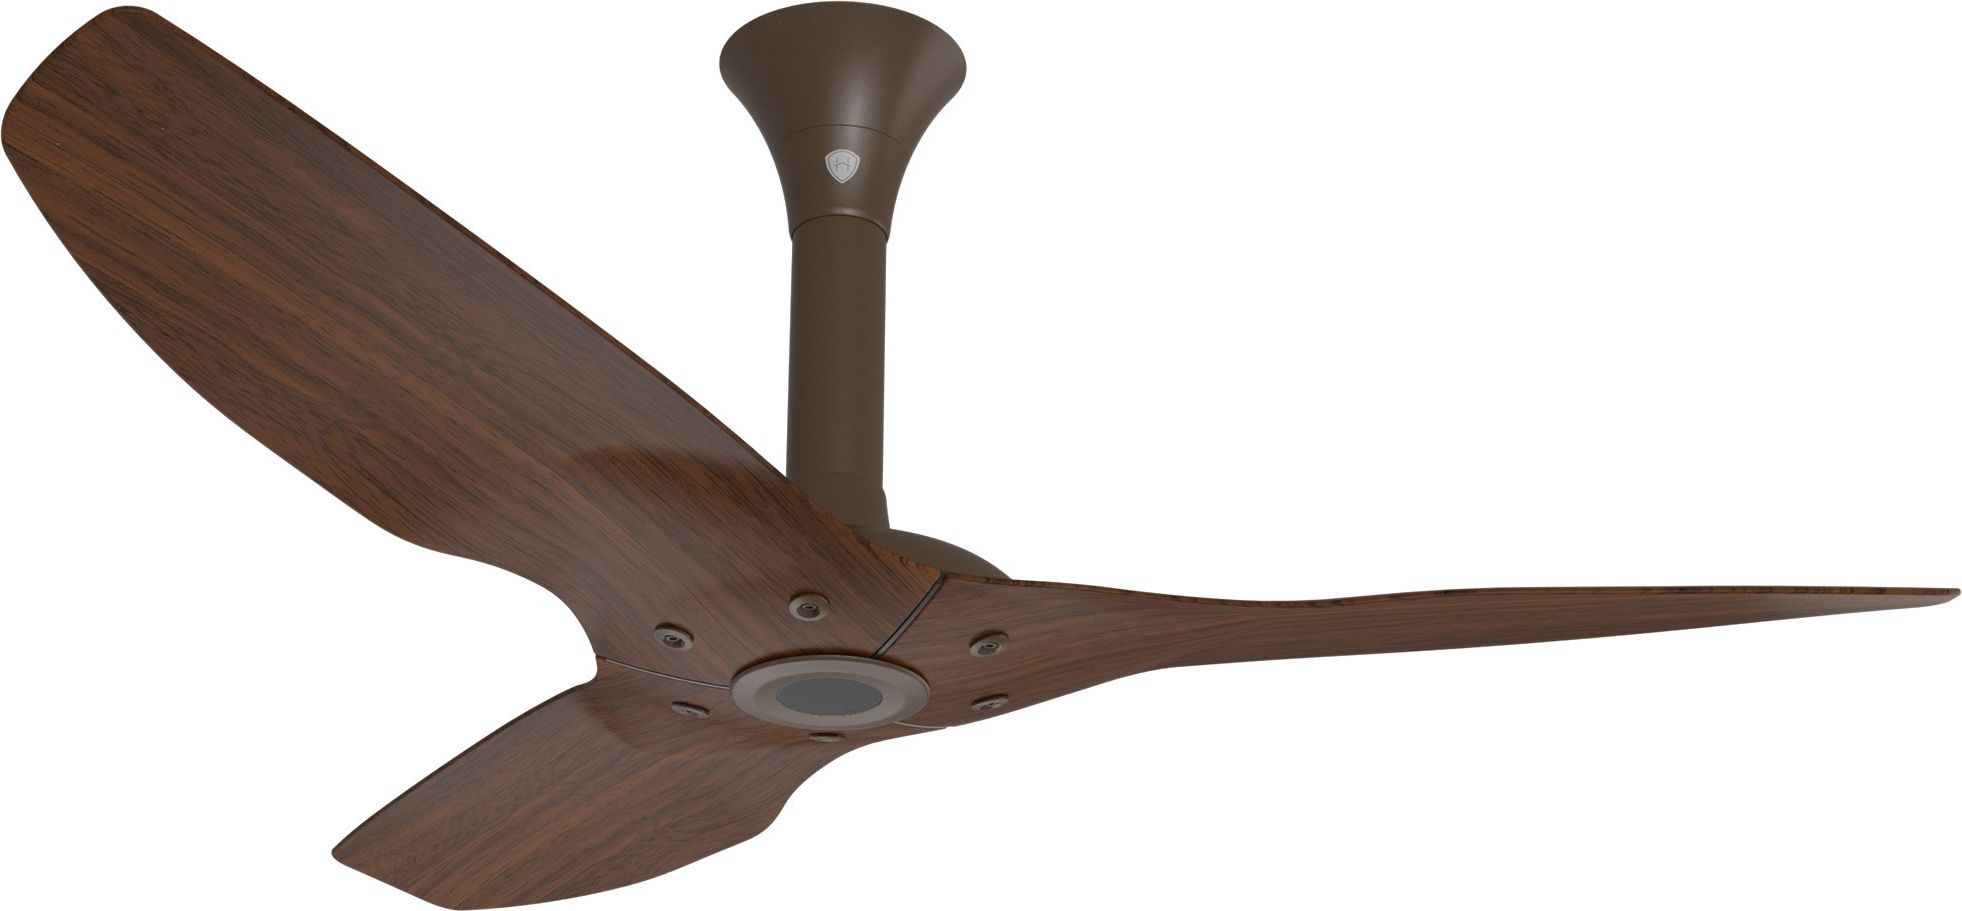 Most Up To Date Haiku Outdoor Ceiling Fan: 52", Cocoa Woodgrain Aluminum, Standard Within Outdoor Ceiling Fans (View 4 of 20)